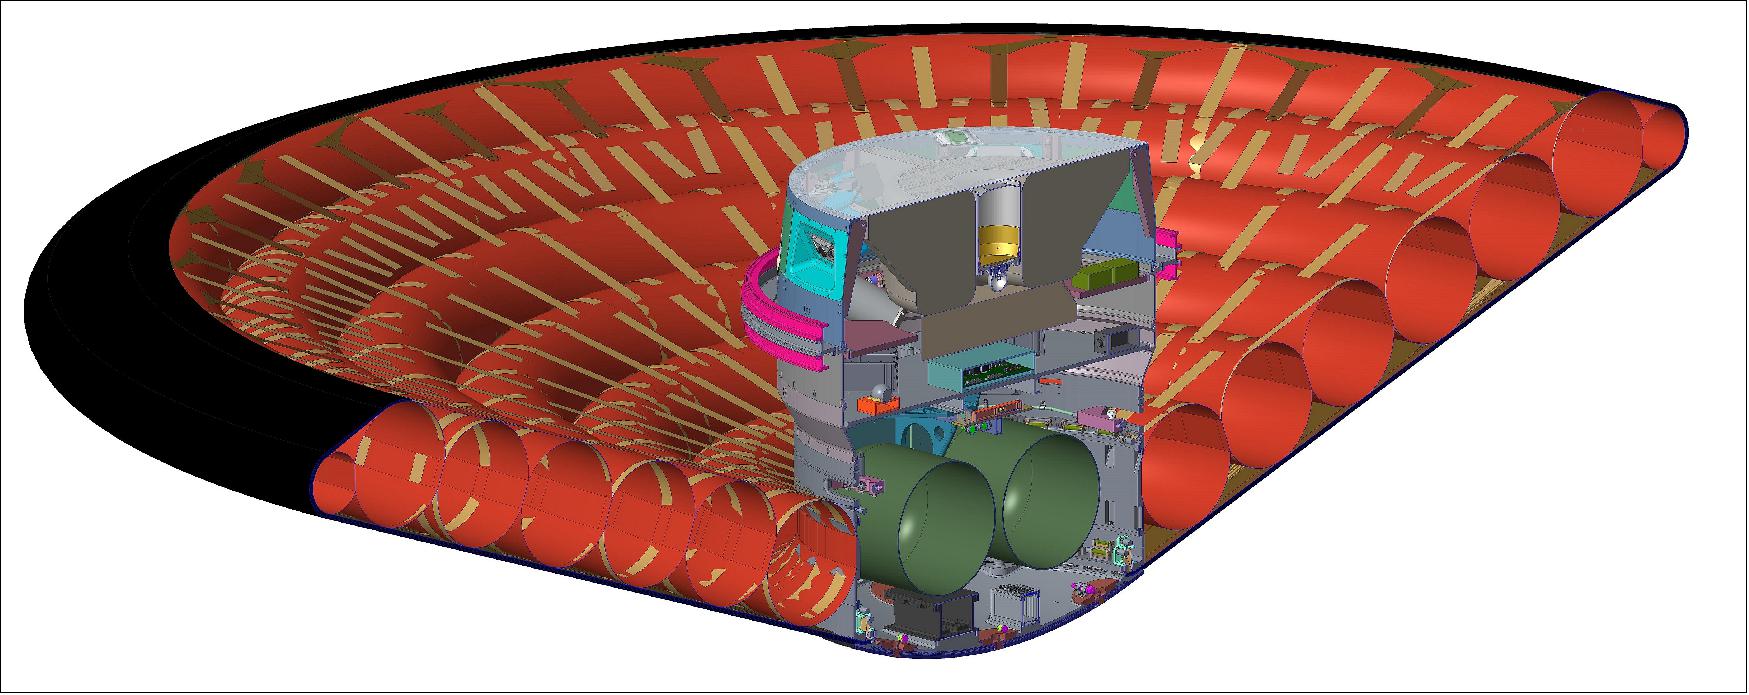 Figure 6: Artist rendering of the LOFTID aeroshell and payload. For this flight experiment, the payload consists of the inflation system (large green tanks), instrumentation throughout the flexible heat shield and inflatable structure, data handling, internal data recorder, ejectable data recorder and parachute( image credit: NASA/LaRC)